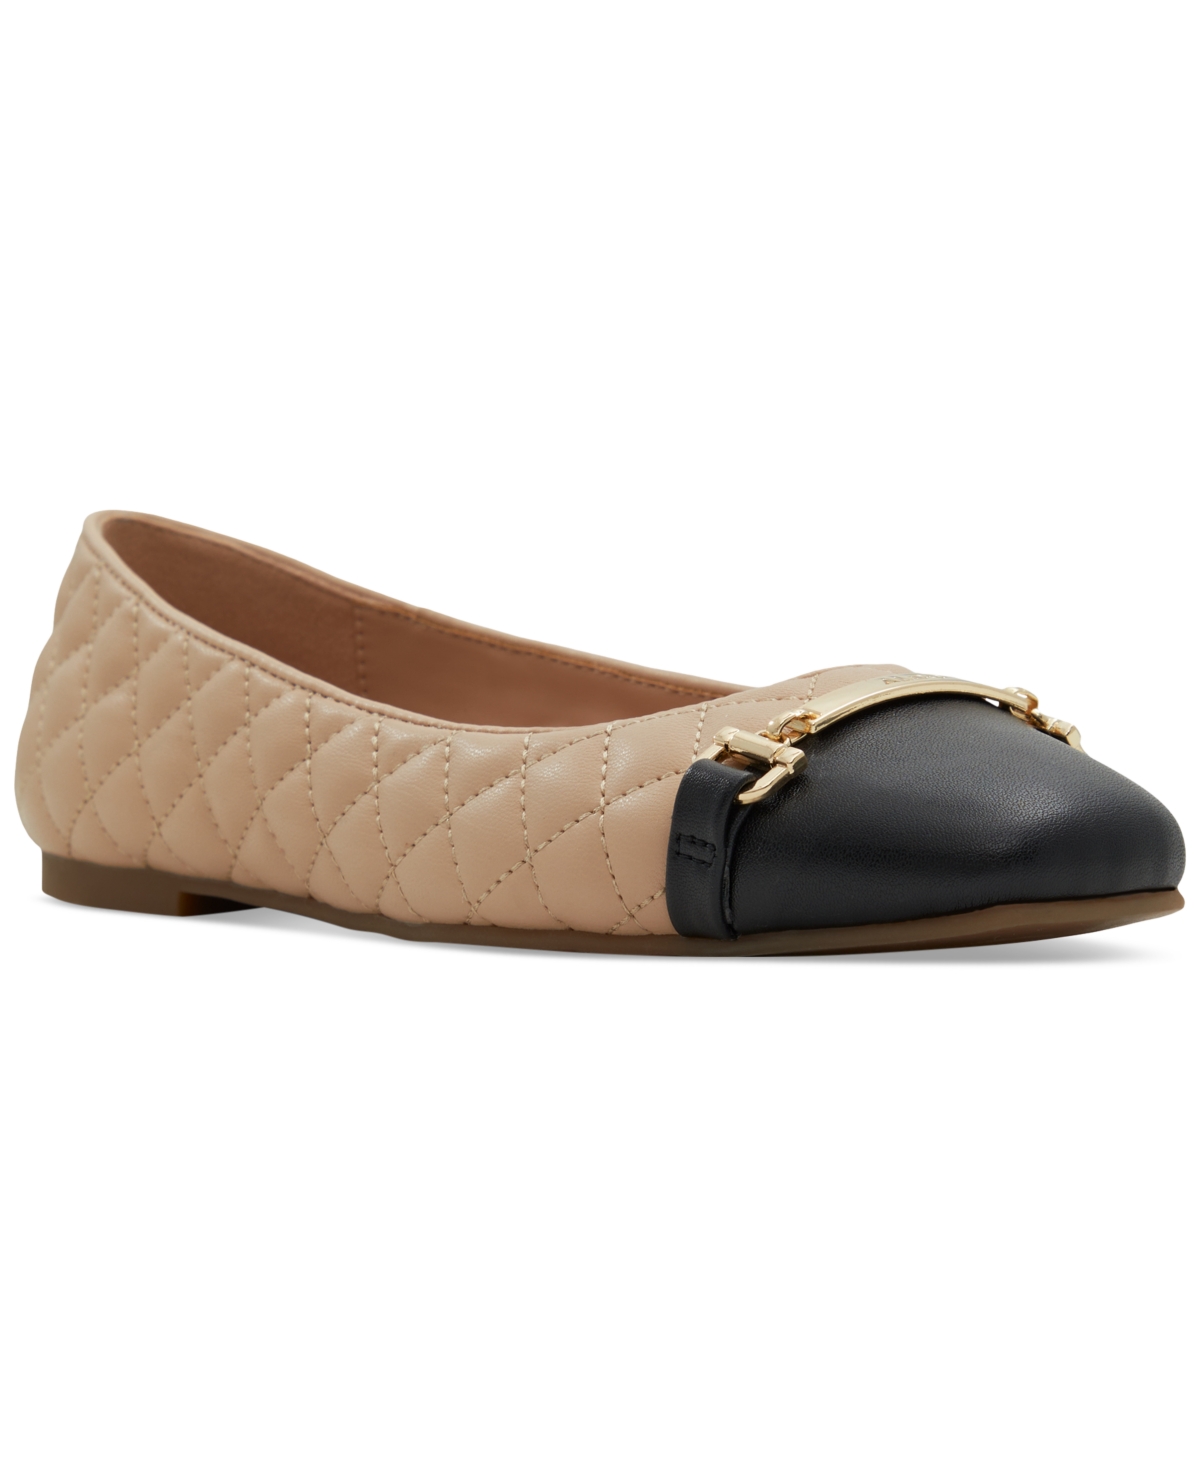 Women's Leanne Quilted Hardware Slip-On Flats - Beige/Black Leather